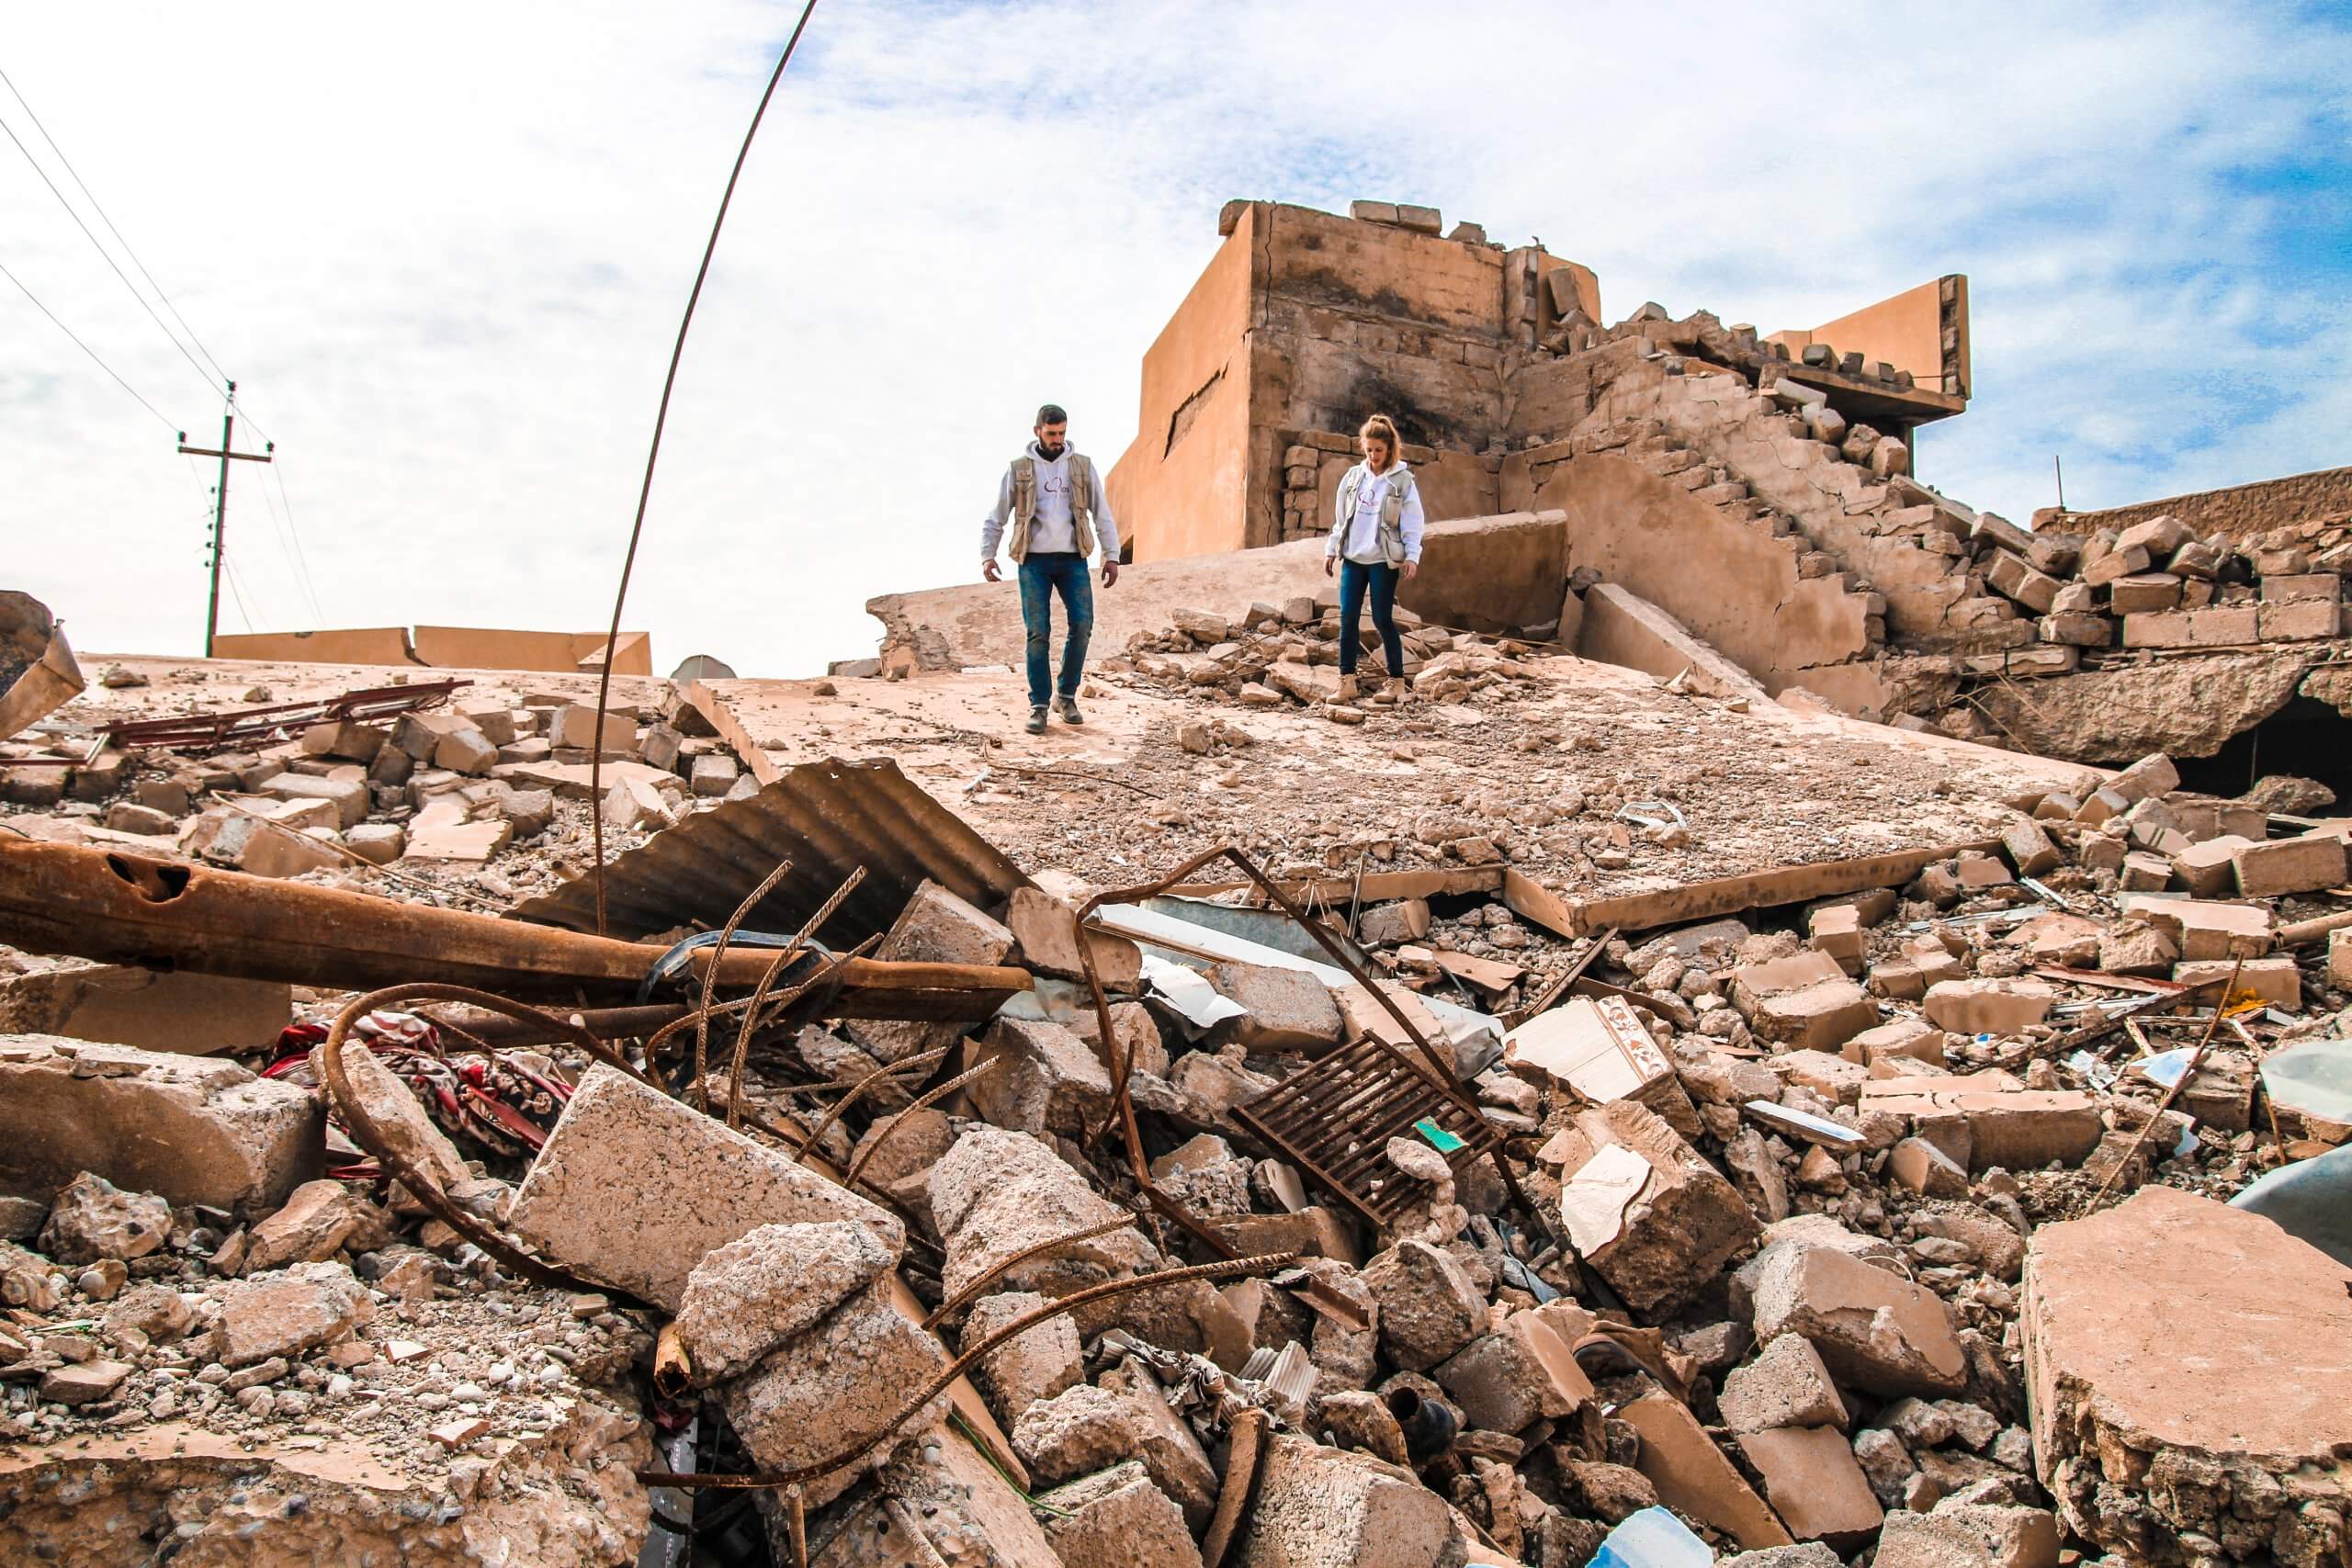 The Christian villages of the Nineveh Plain are liberated but only ruins remain.